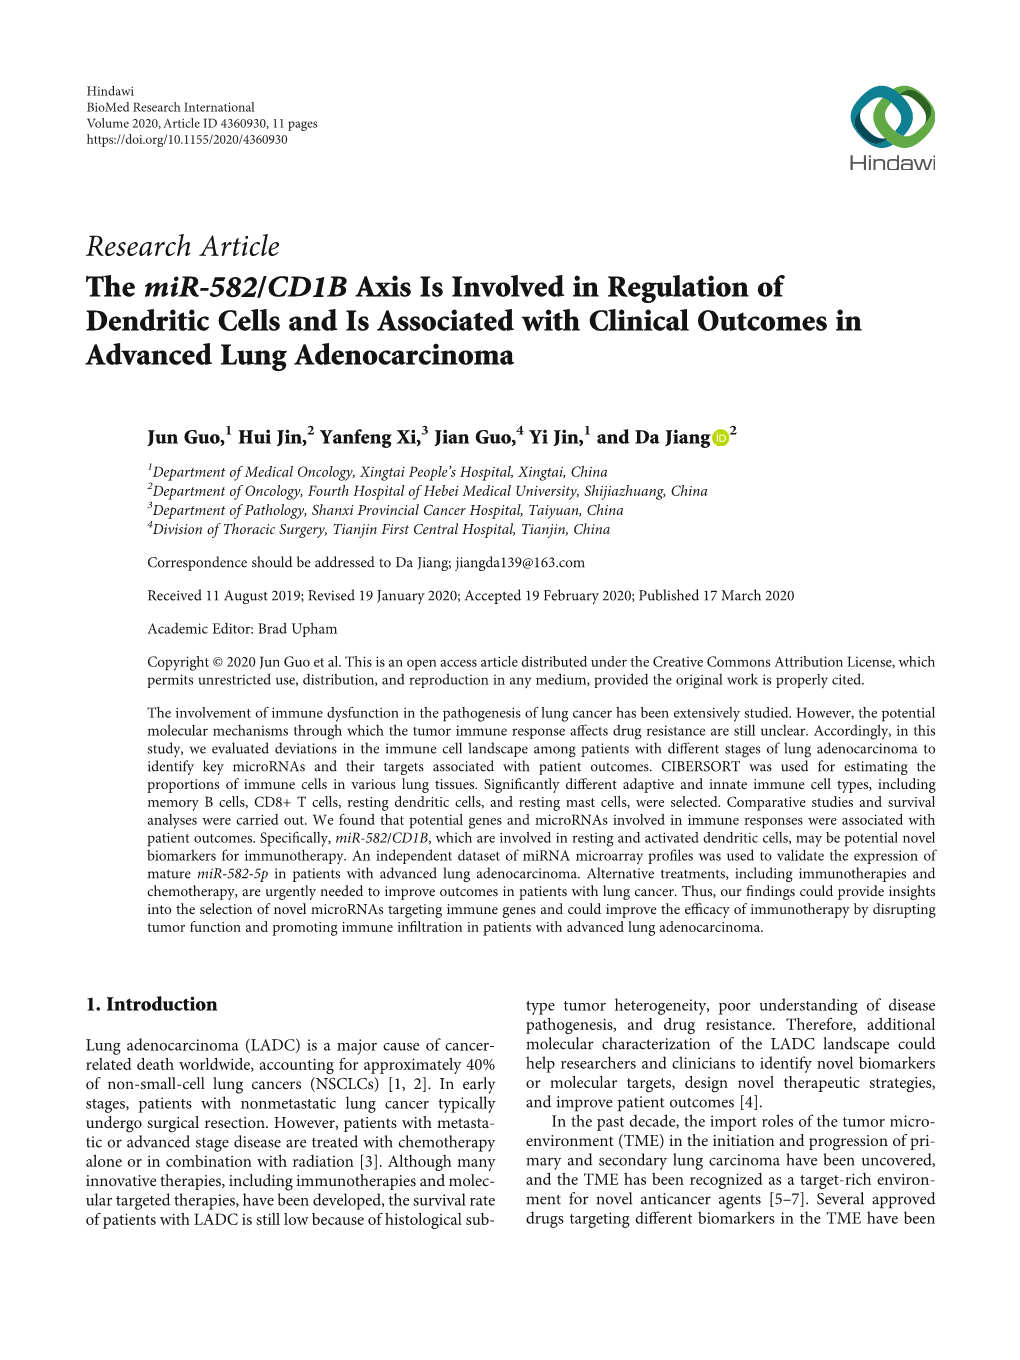 Research Article the Mir-582/CD1B Axis Is Involved in Regulation of Dendritic Cells and Is Associated with Clinical Outcomes in Advanced Lung Adenocarcinoma